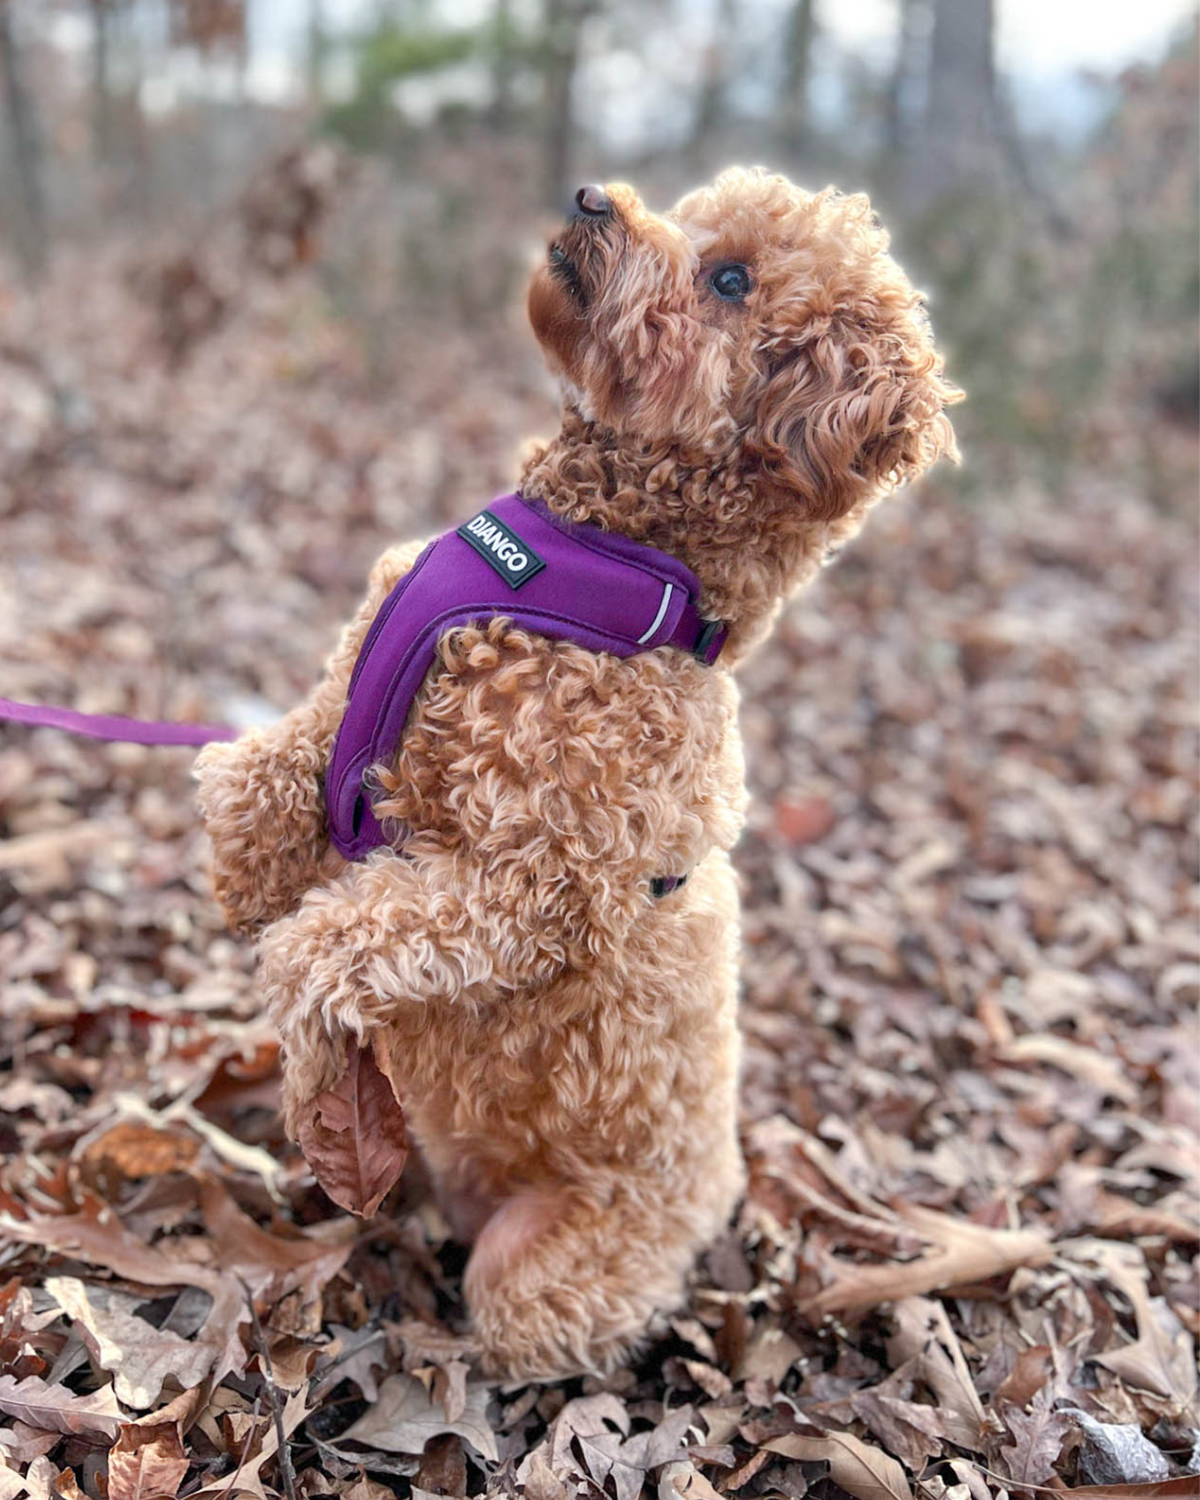 DJANGO's Adventure Dog Harness is a lightweight, padded, and comfortable harness for dogs designed for outdoor adventures and everyday wear. Dogs love DJANGO's soft-to-the-touch custom webbing. - djangobrand.com